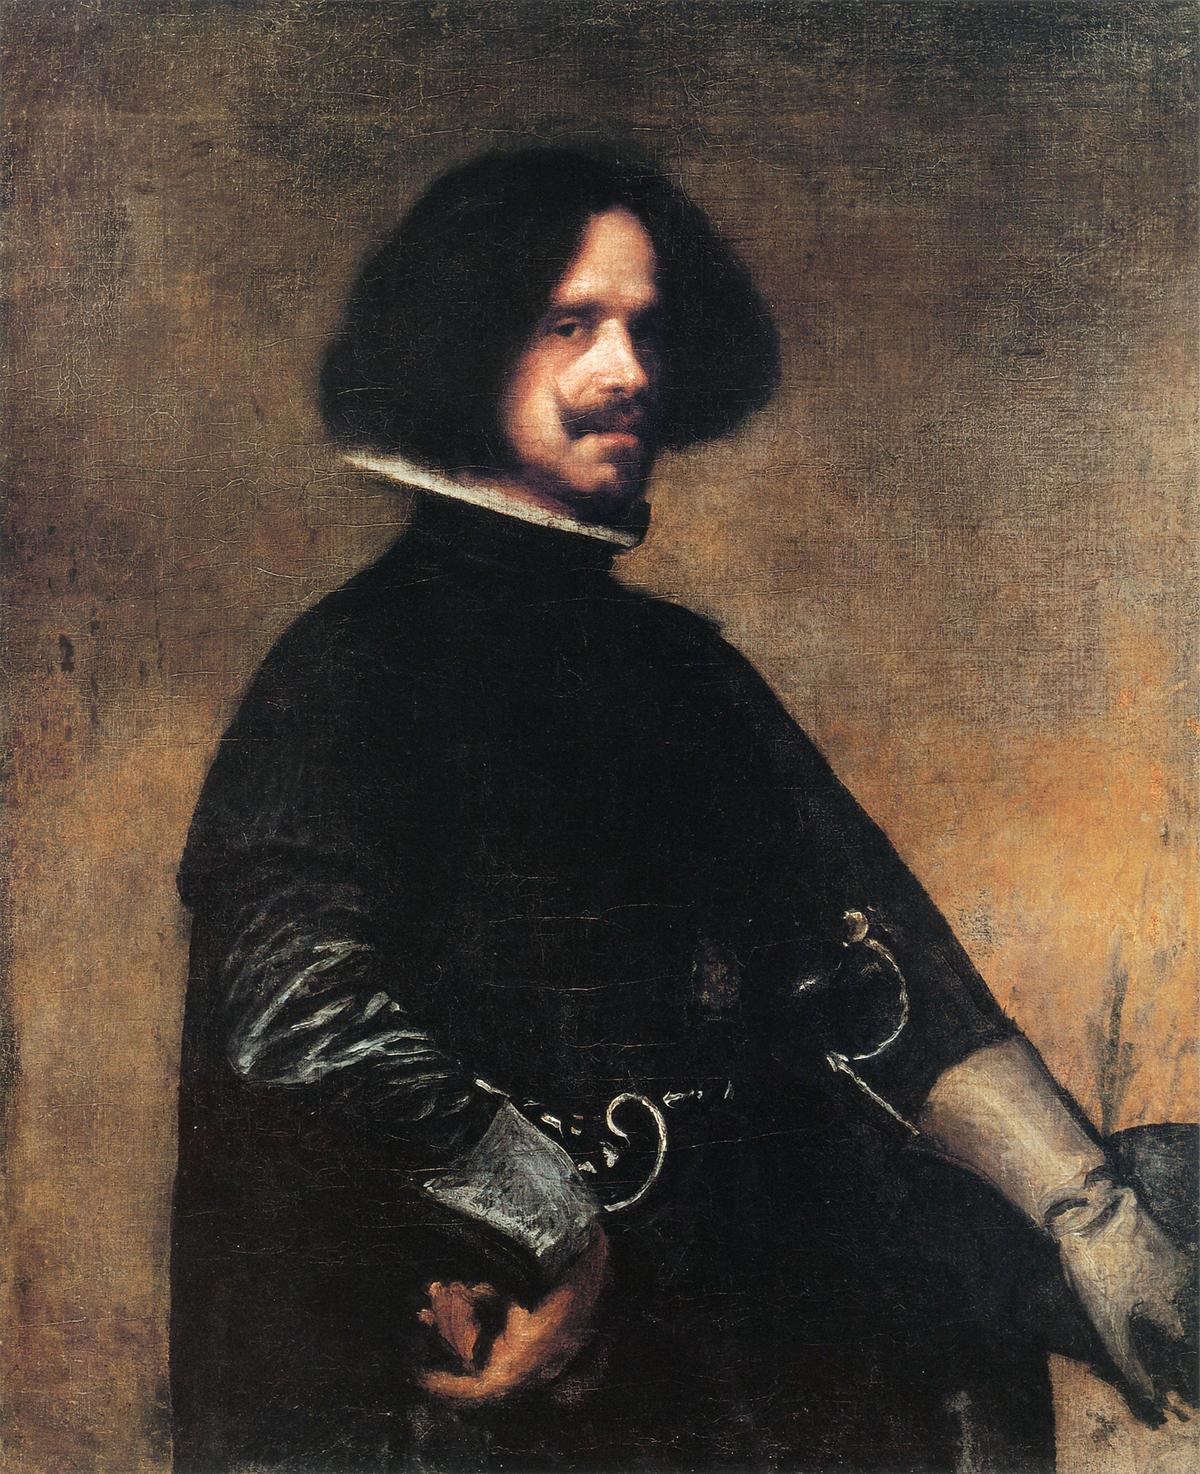 “Self Portrait,” 1645, by Diego Velázquez. Oil on canvas: 40.74 inches by 32.48 inches. Galleria degli Uffizi, Florence. (PD-US)